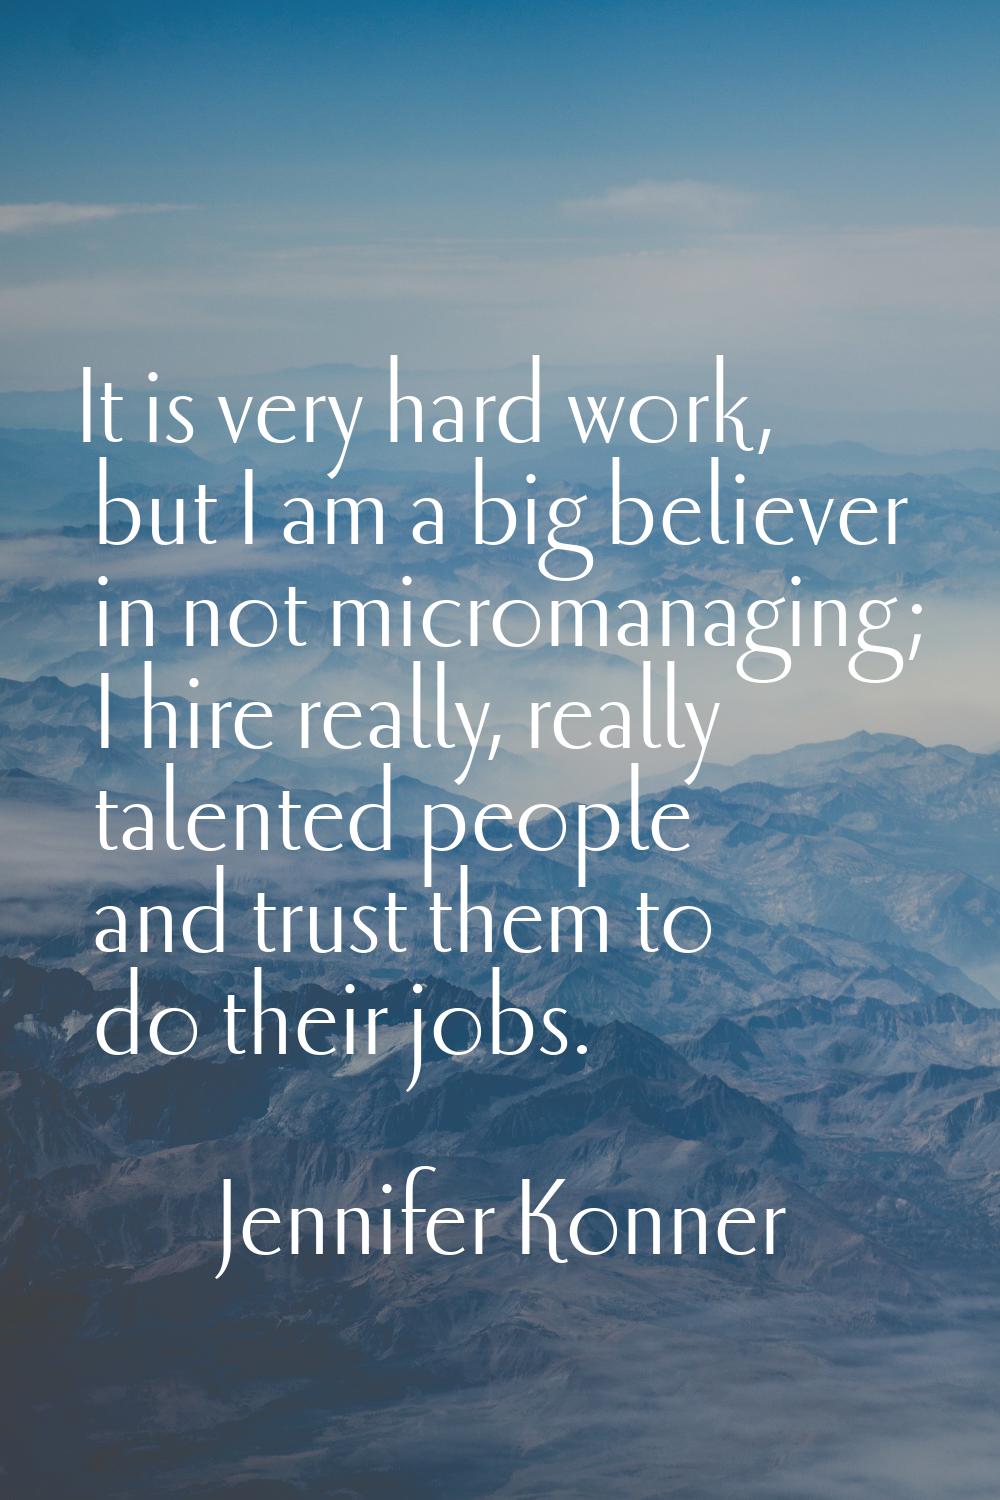 It is very hard work, but I am a big believer in not micromanaging; I hire really, really talented 